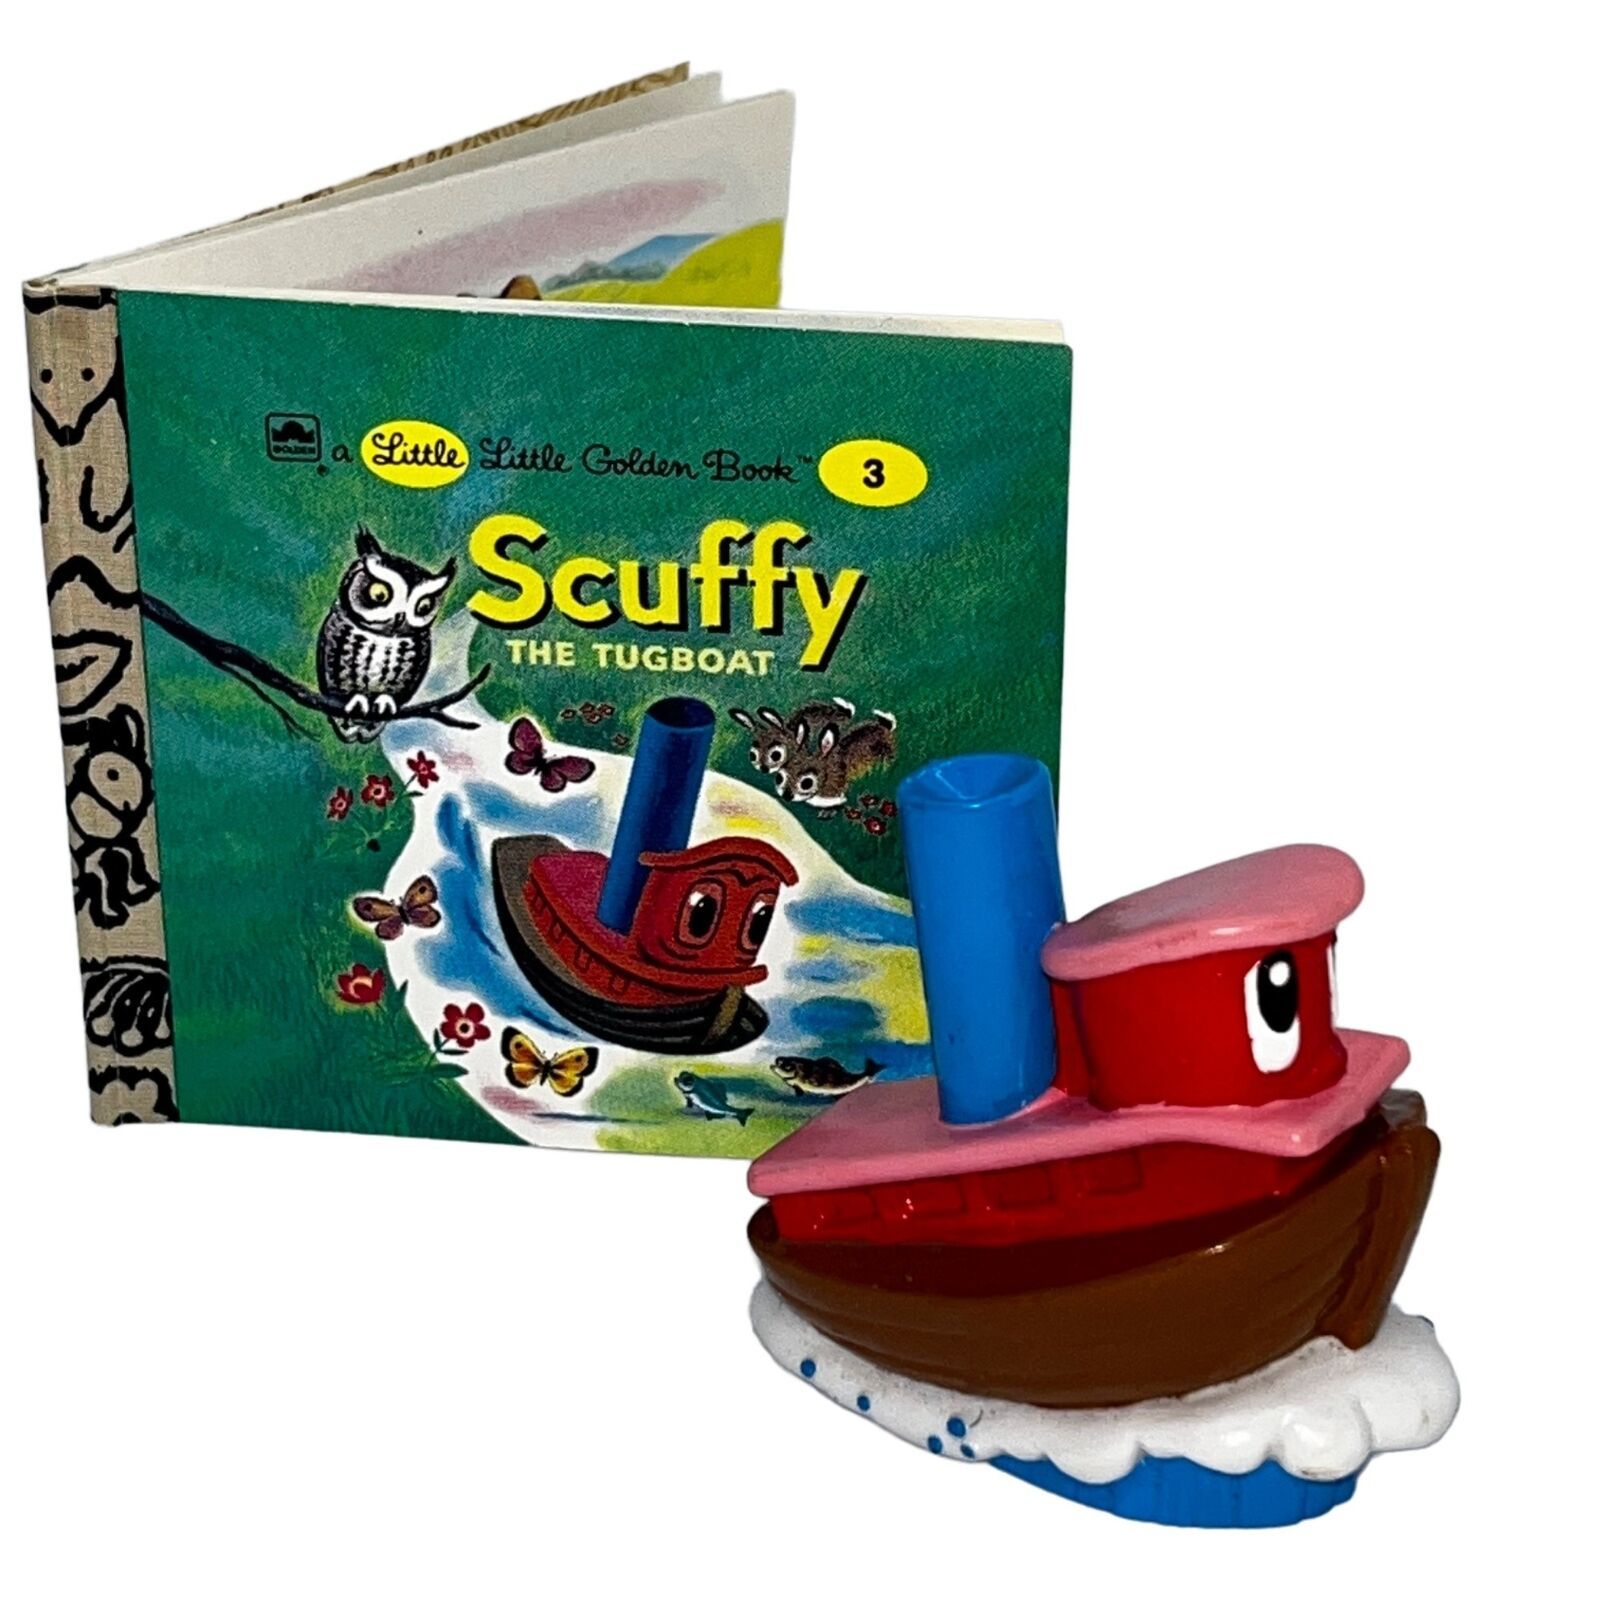 Miniature Little Golden Book Land and Scuffy The Tugboat PVC Figure Applause - $33.60